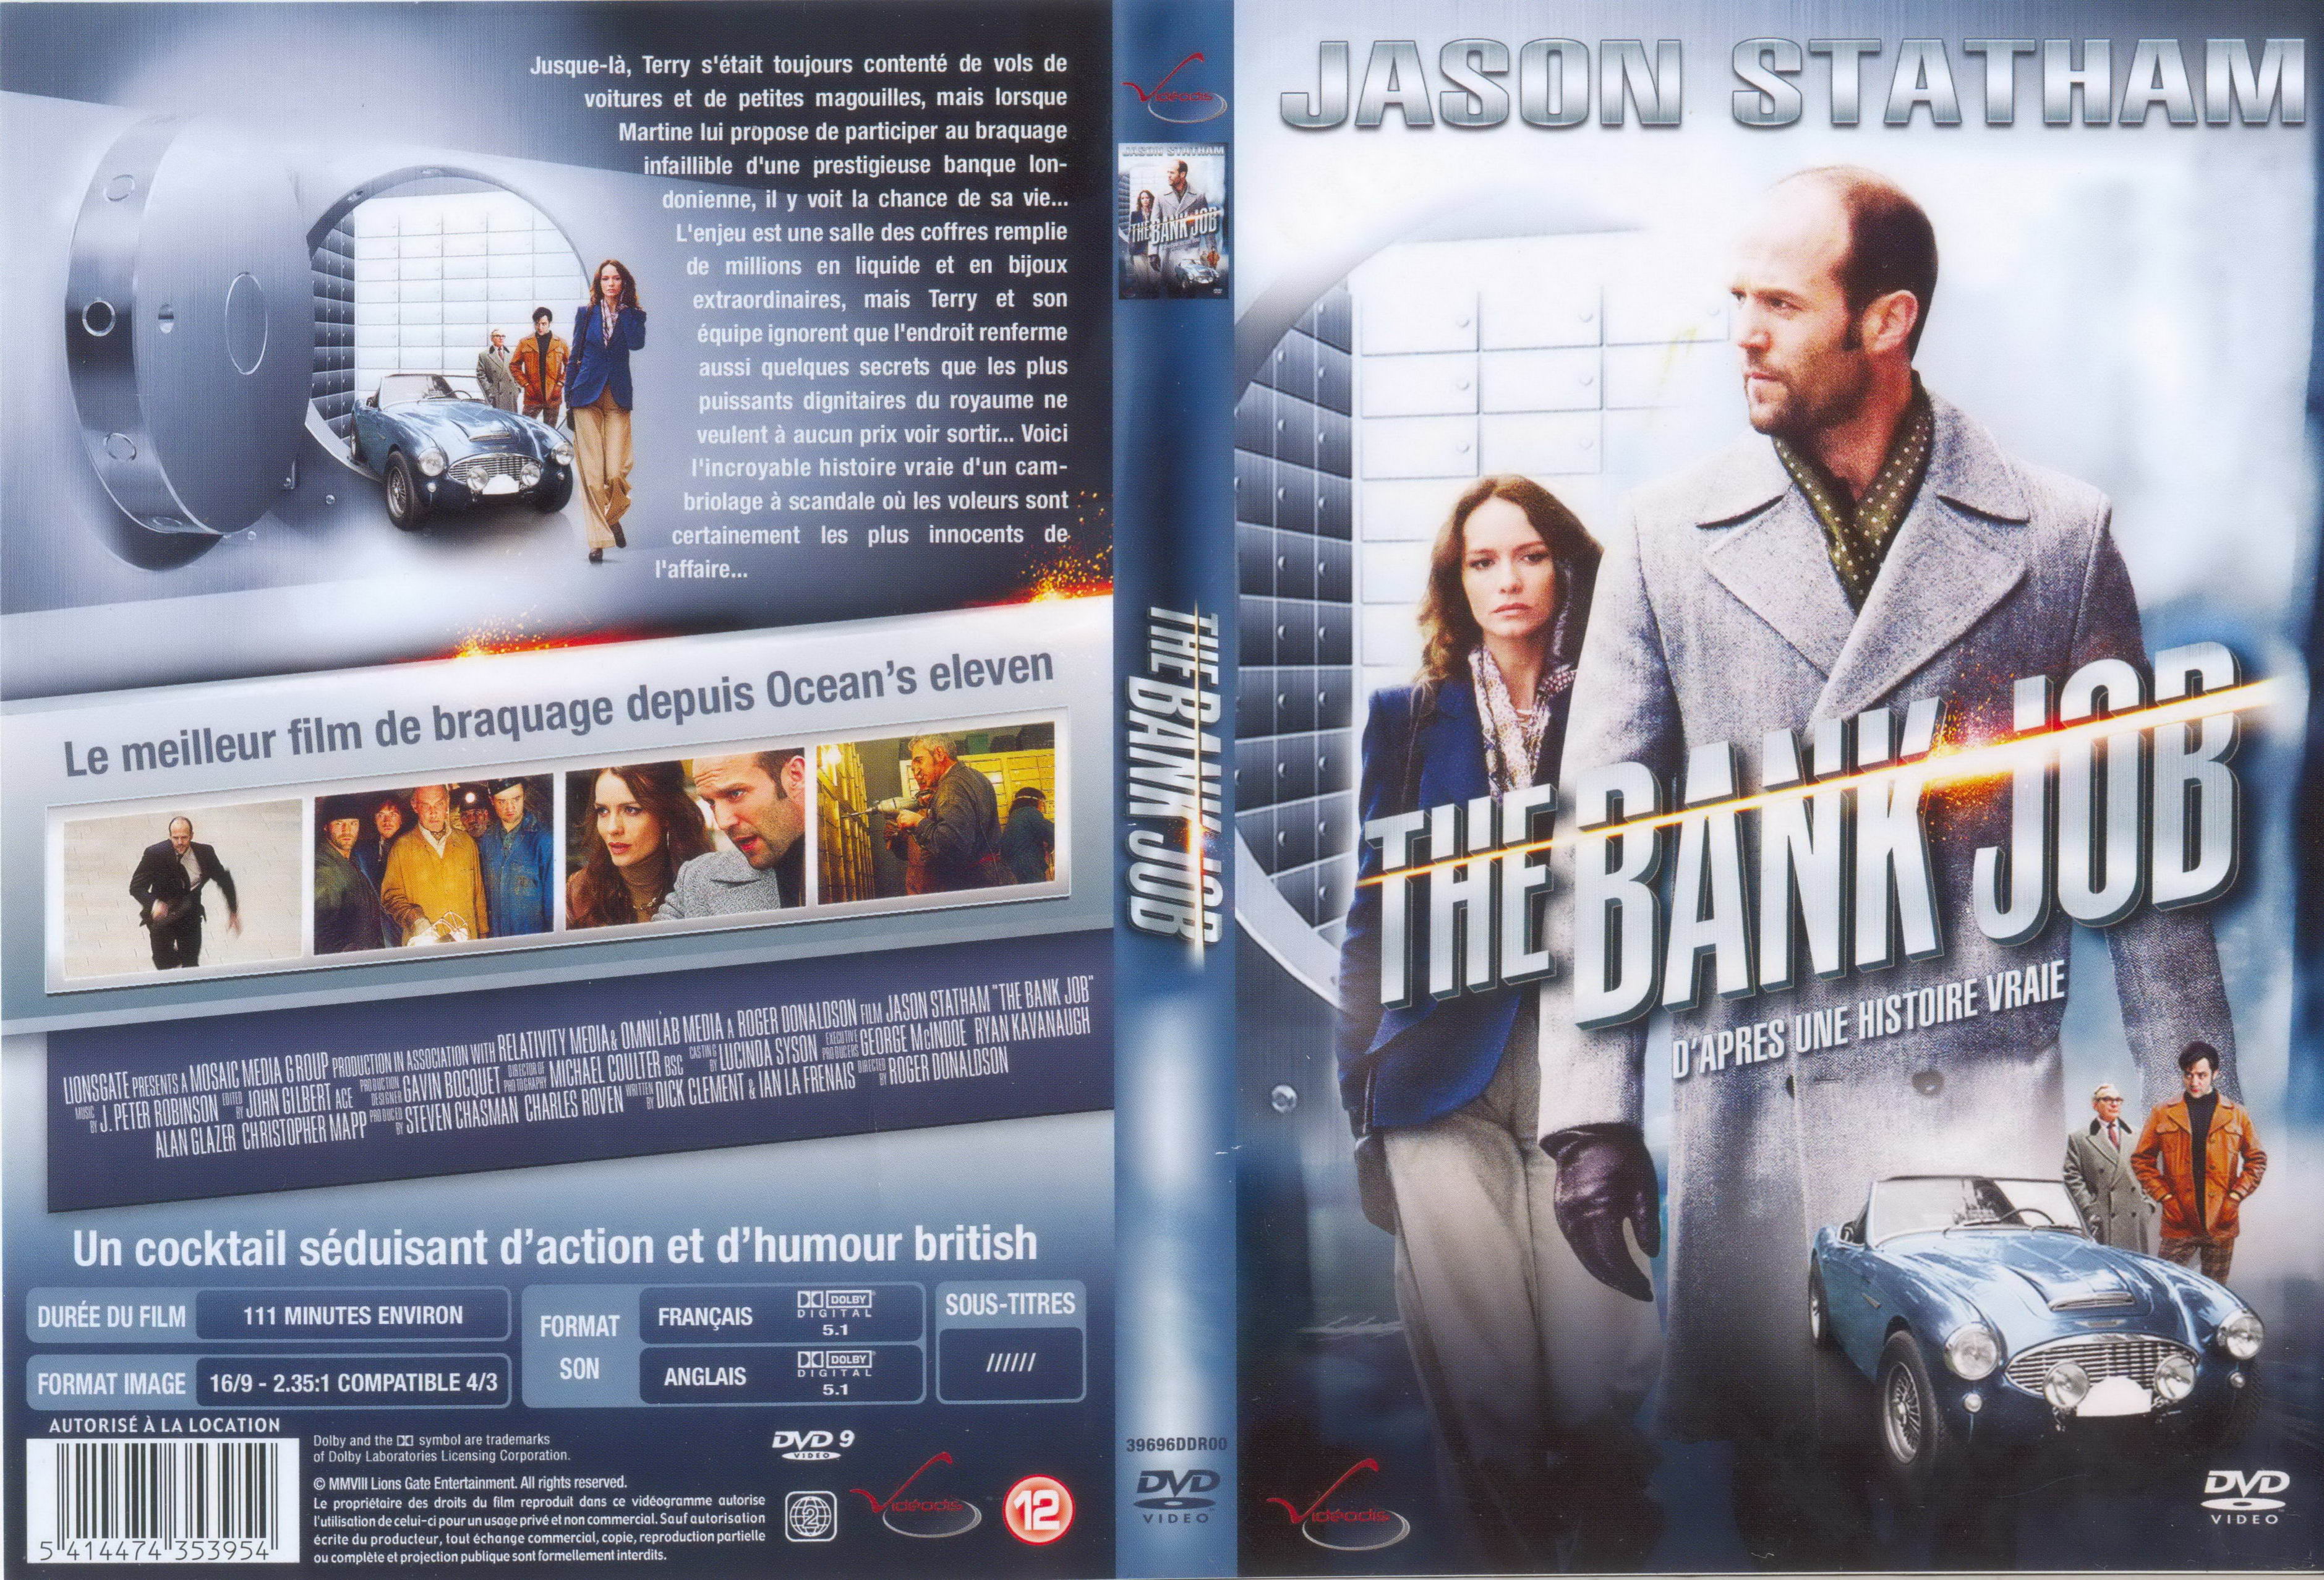 Jaquette DVD The bank job